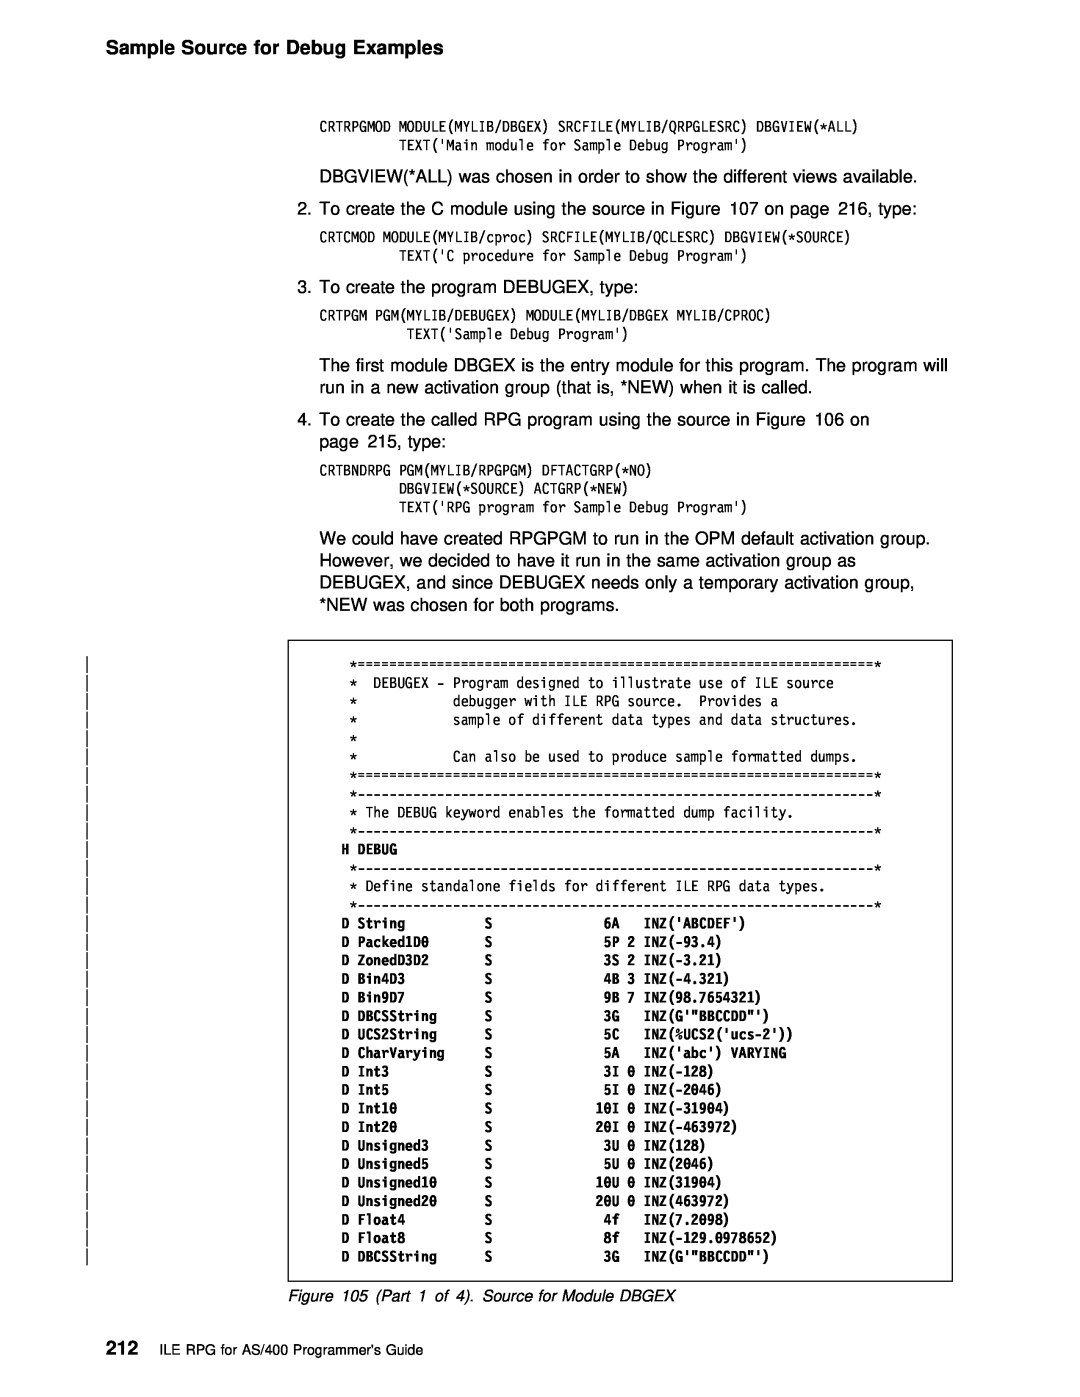 IBM AS/400 manual Sample Source for Debug Examples, Part 1 of 4. Source for Module DBGEX 